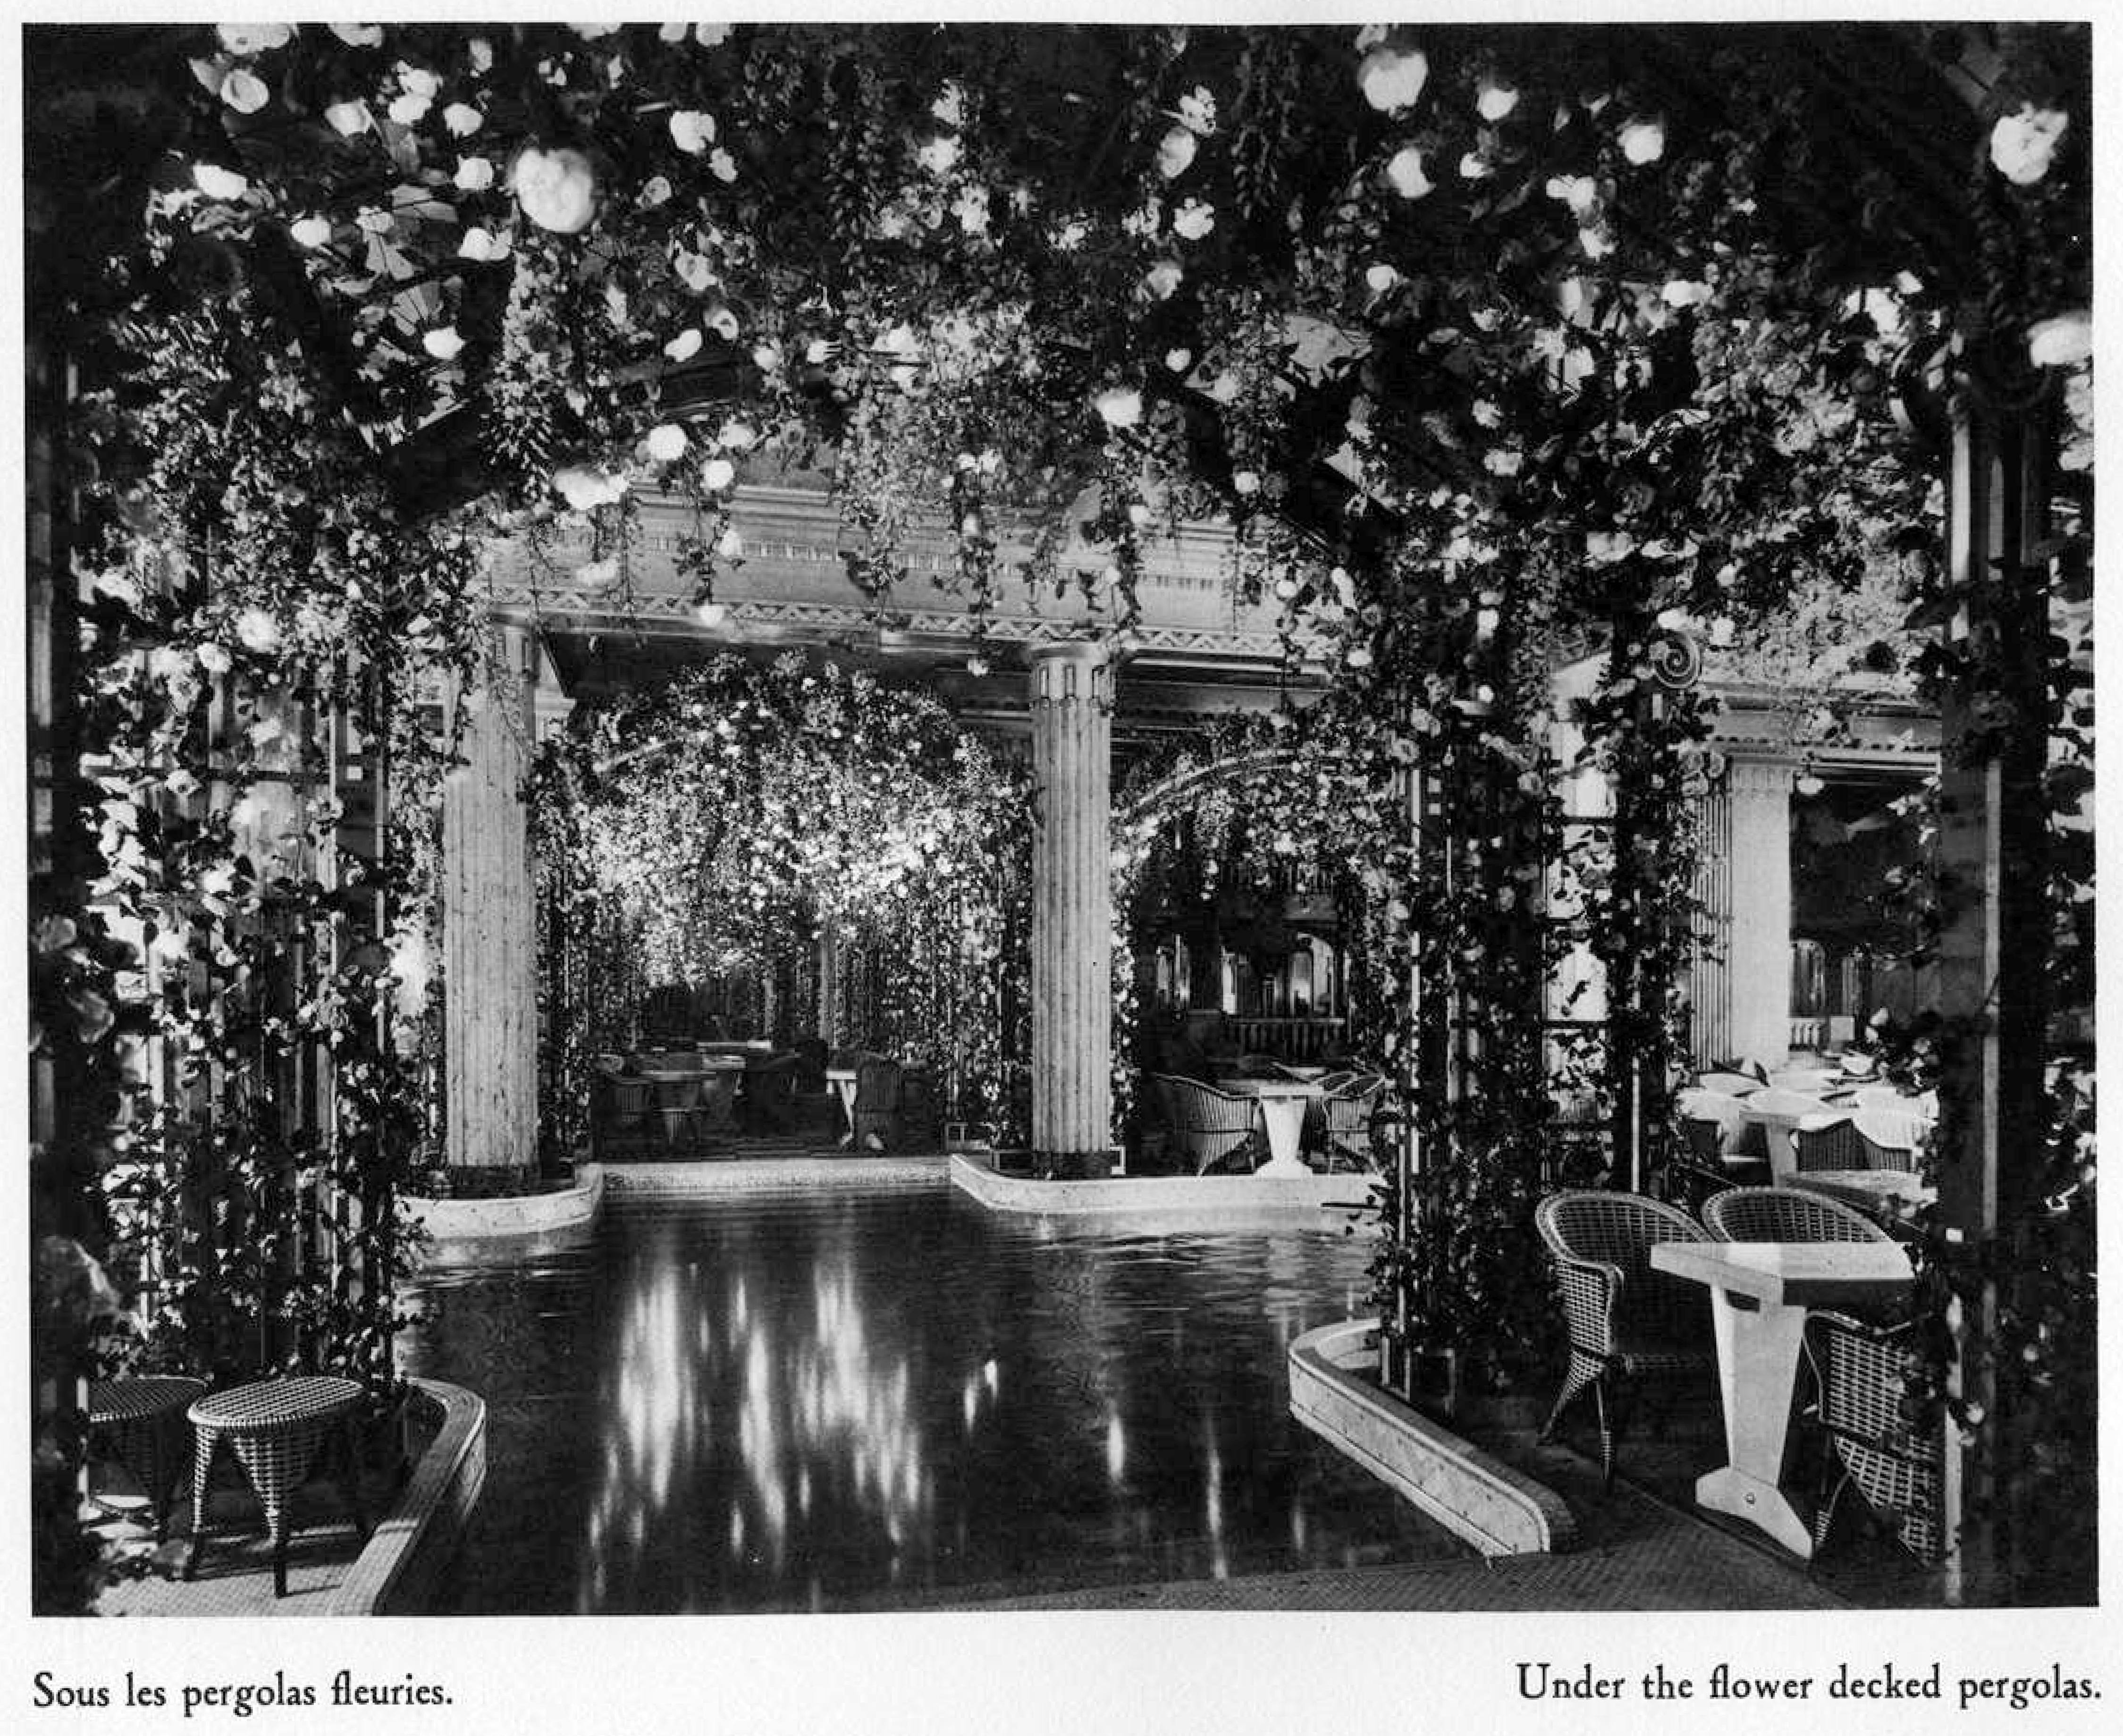 Black and white image of an interior pool surrounded by seating and covered by flowered pergolas